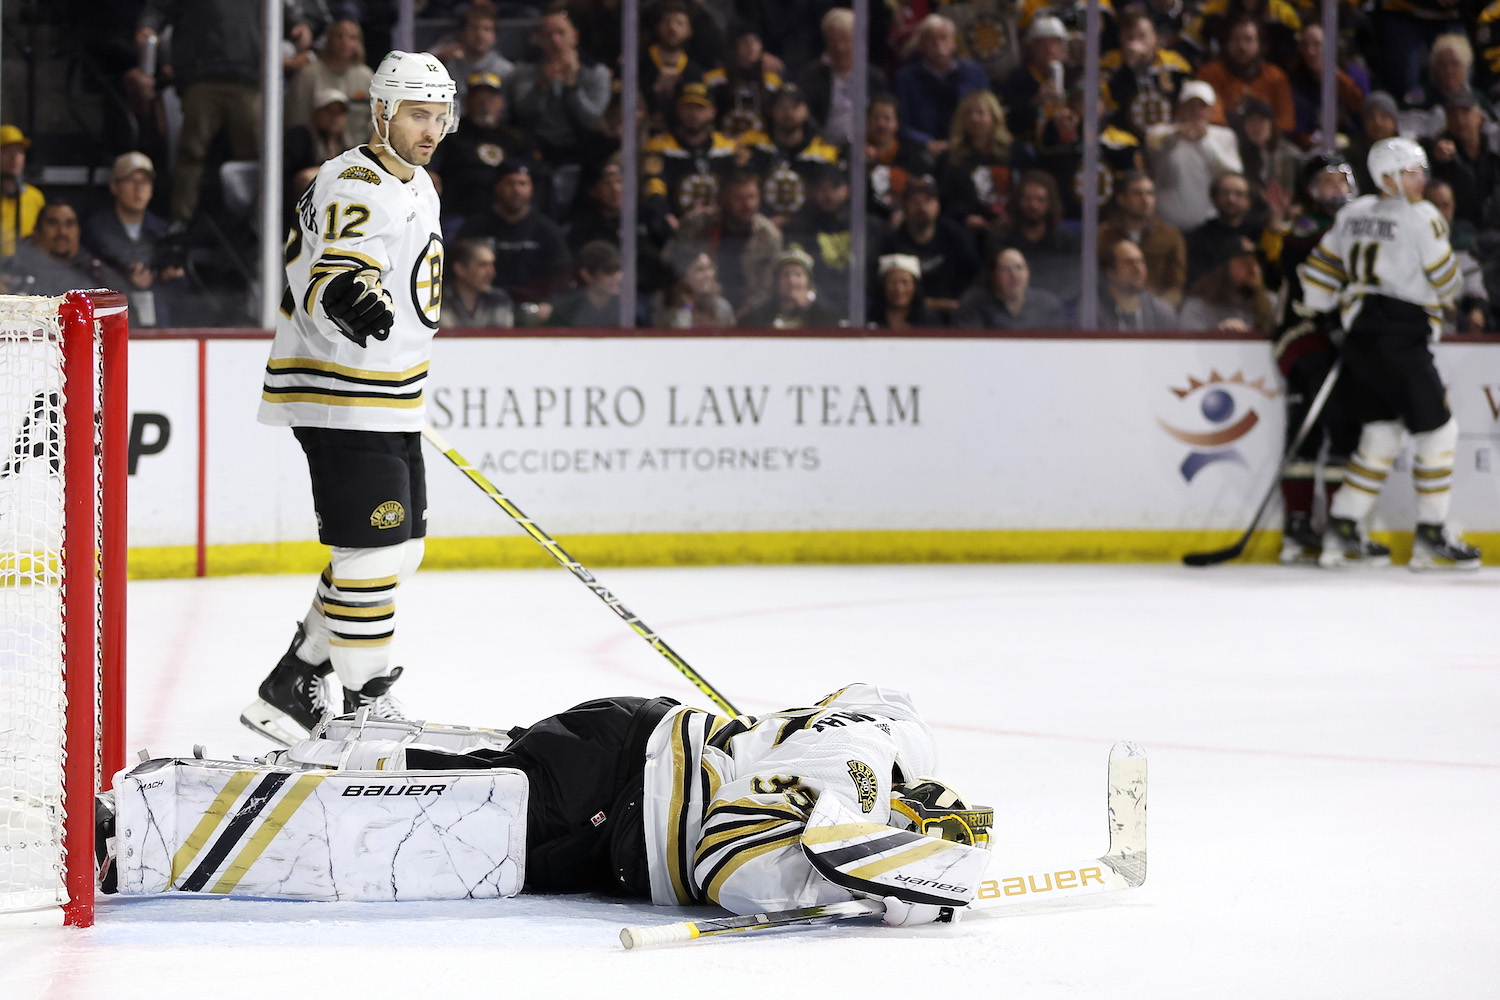 TEMPE, ARIZONA - JANUARY 09: Goaltender Linus Ullmark #35 of the Boston Bruins lays on the ice after an injury in overtime against the Arizona Coyotes at Mullett Arena on January 09, 2024 in Tempe, Arizona. The Coyotes defeated the Bruins 4-3 in overtime. (Photo by Christian Petersen/Getty Images)